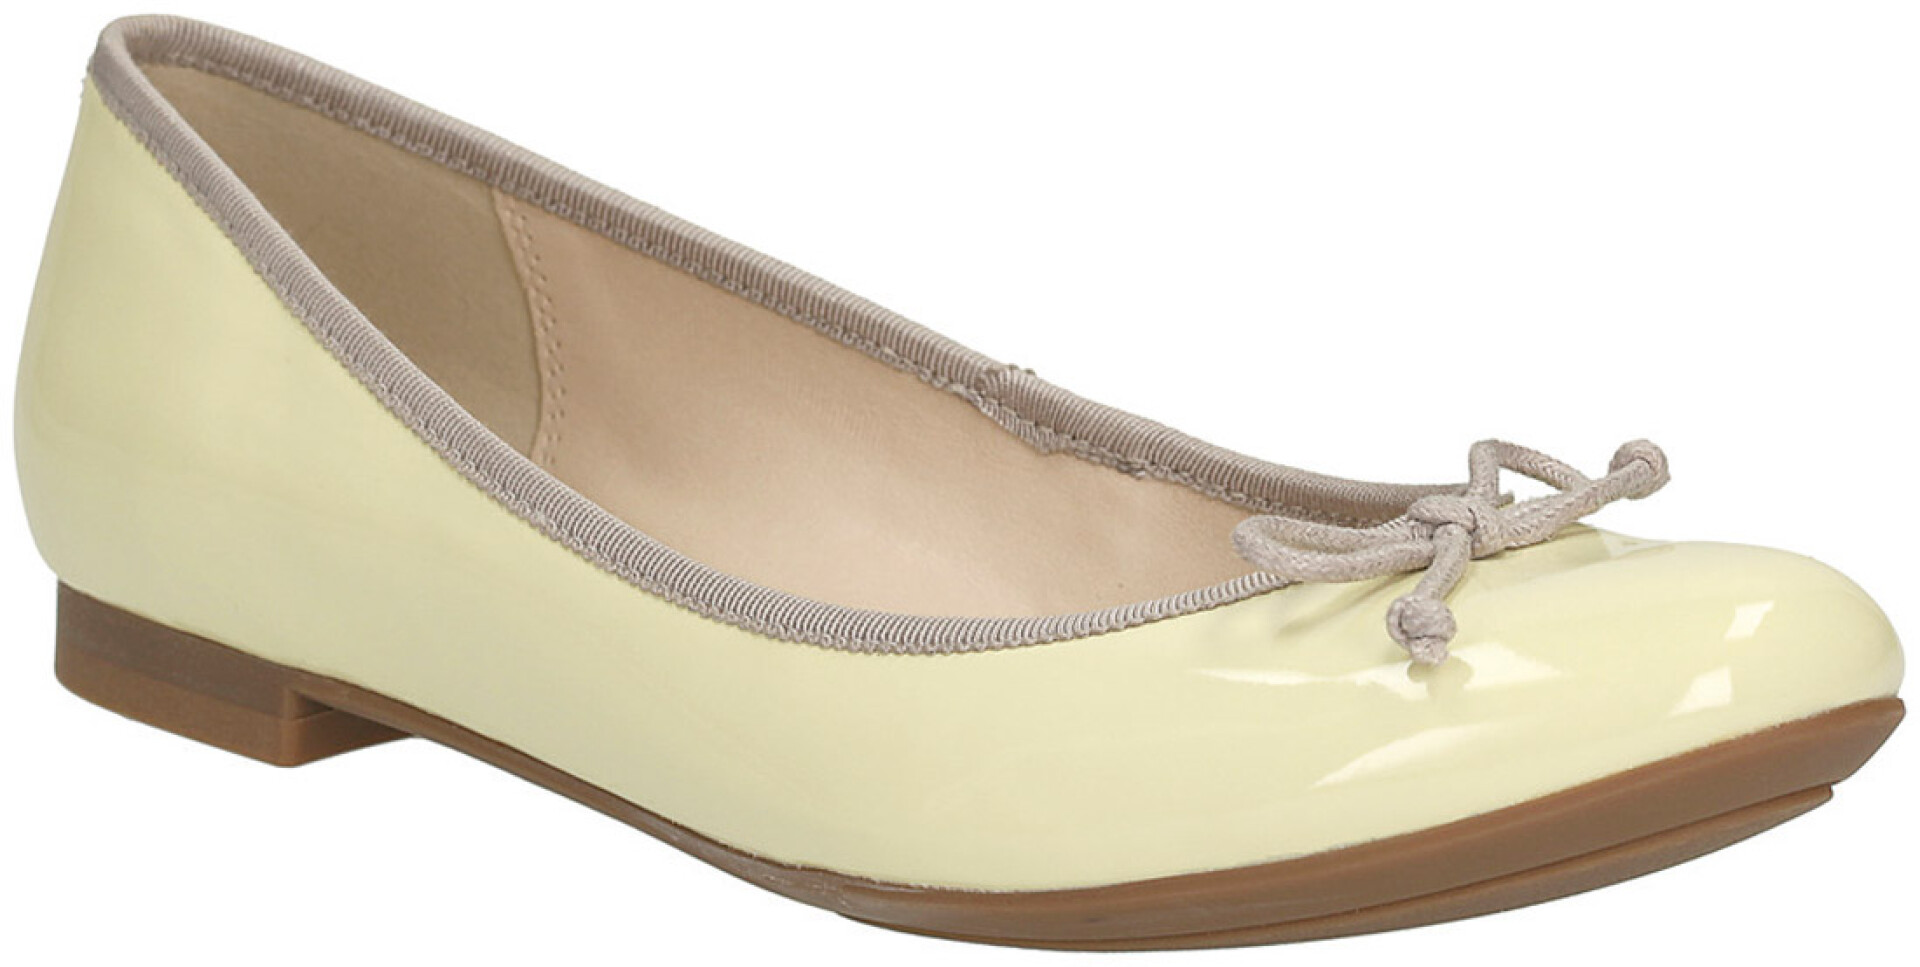 Carousel Ride Clarks - Pale Yellow 